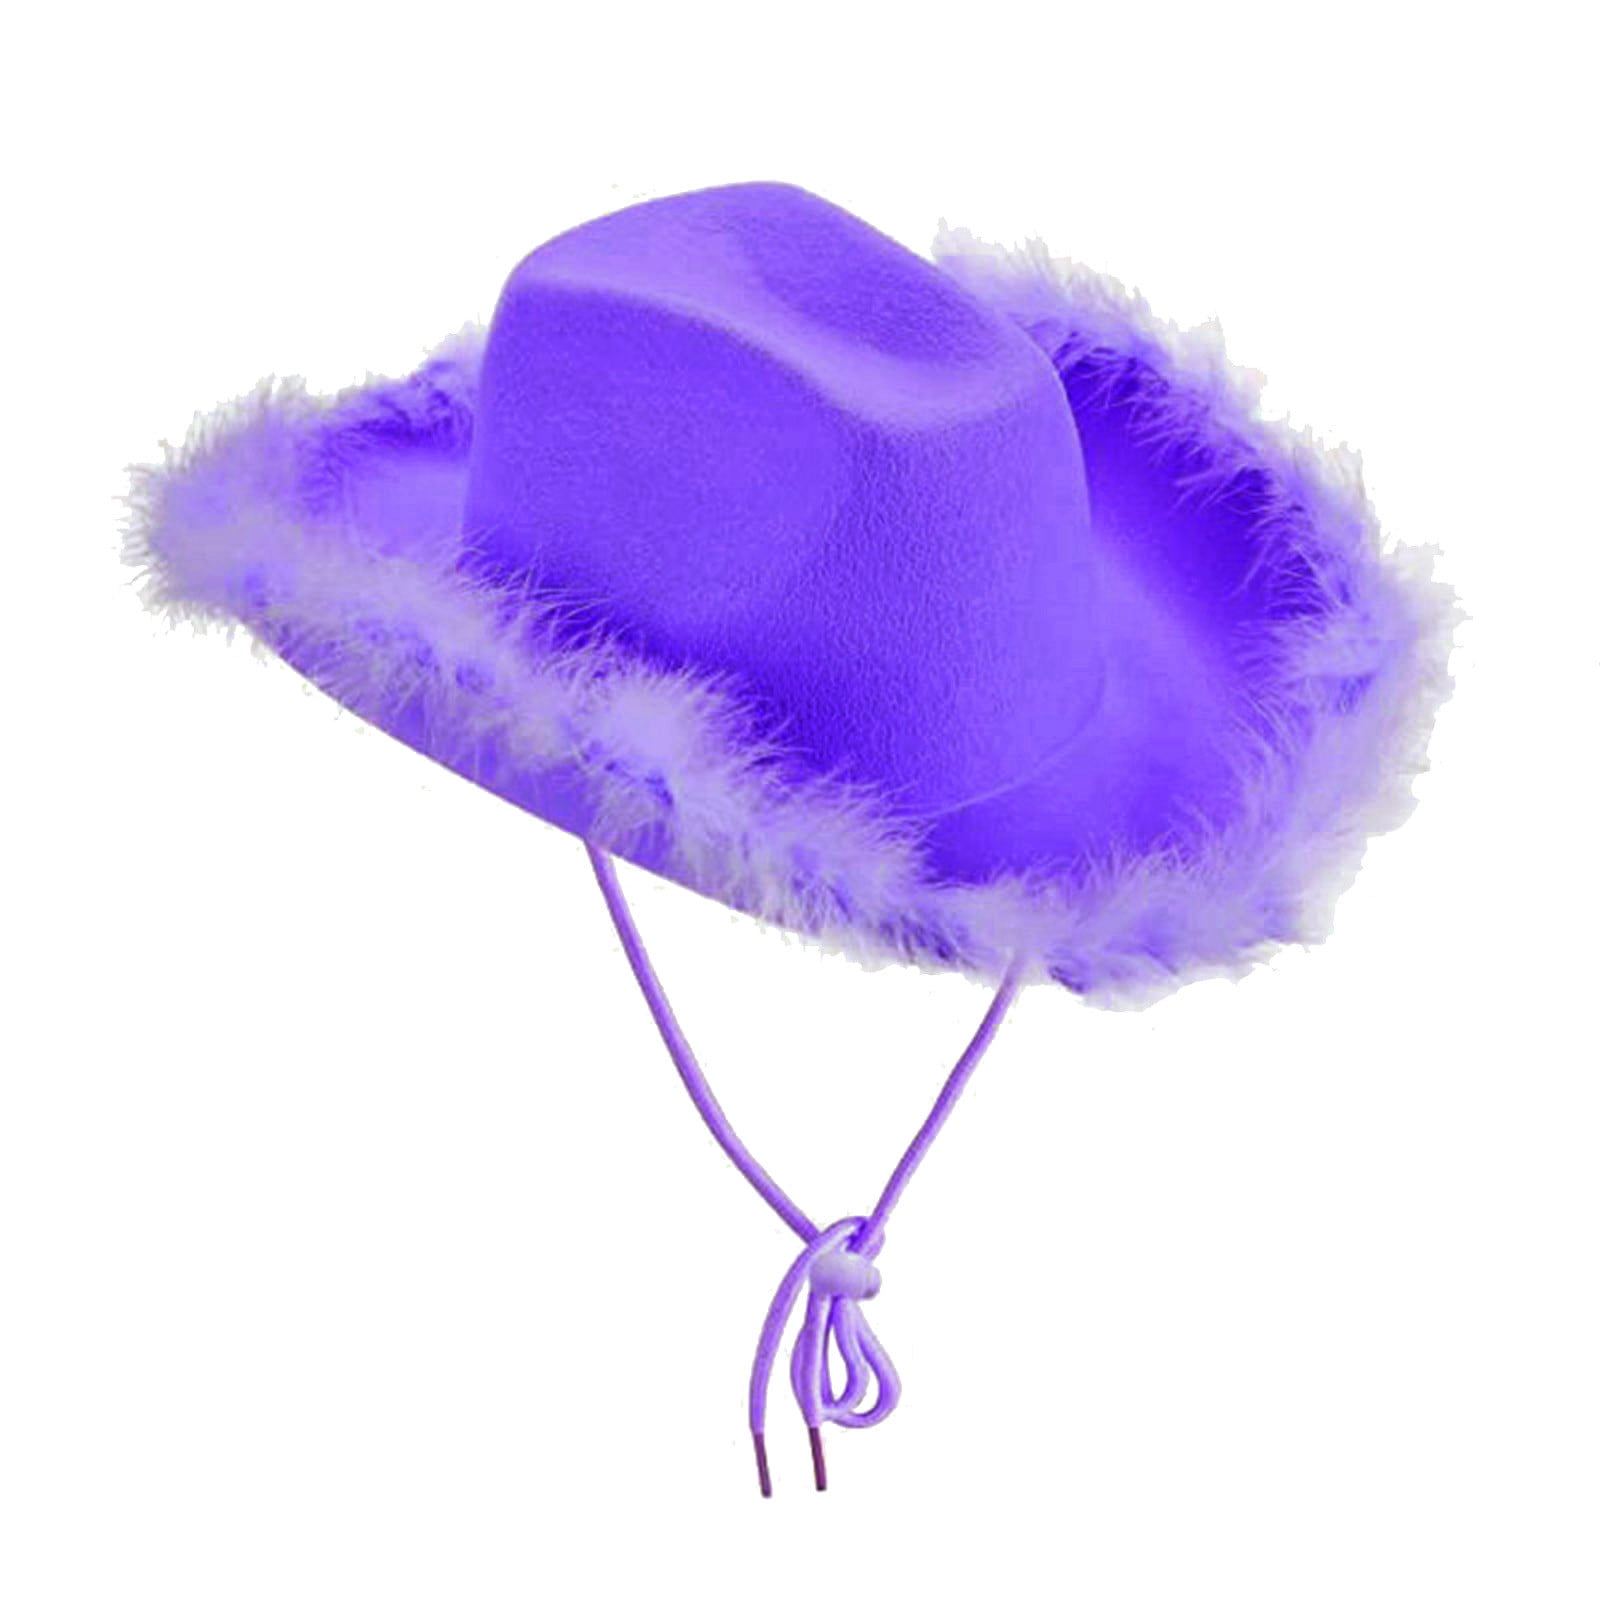 Halloween Deals 40g Turkey Feathers Hat with Feathers Boa Novelty Pink  Feather Blinking Rhinestone Cowboy Hat Dancing Wedding Crafting up Wedding  Party Decoration Set Womens Plus Halloween Cloak 